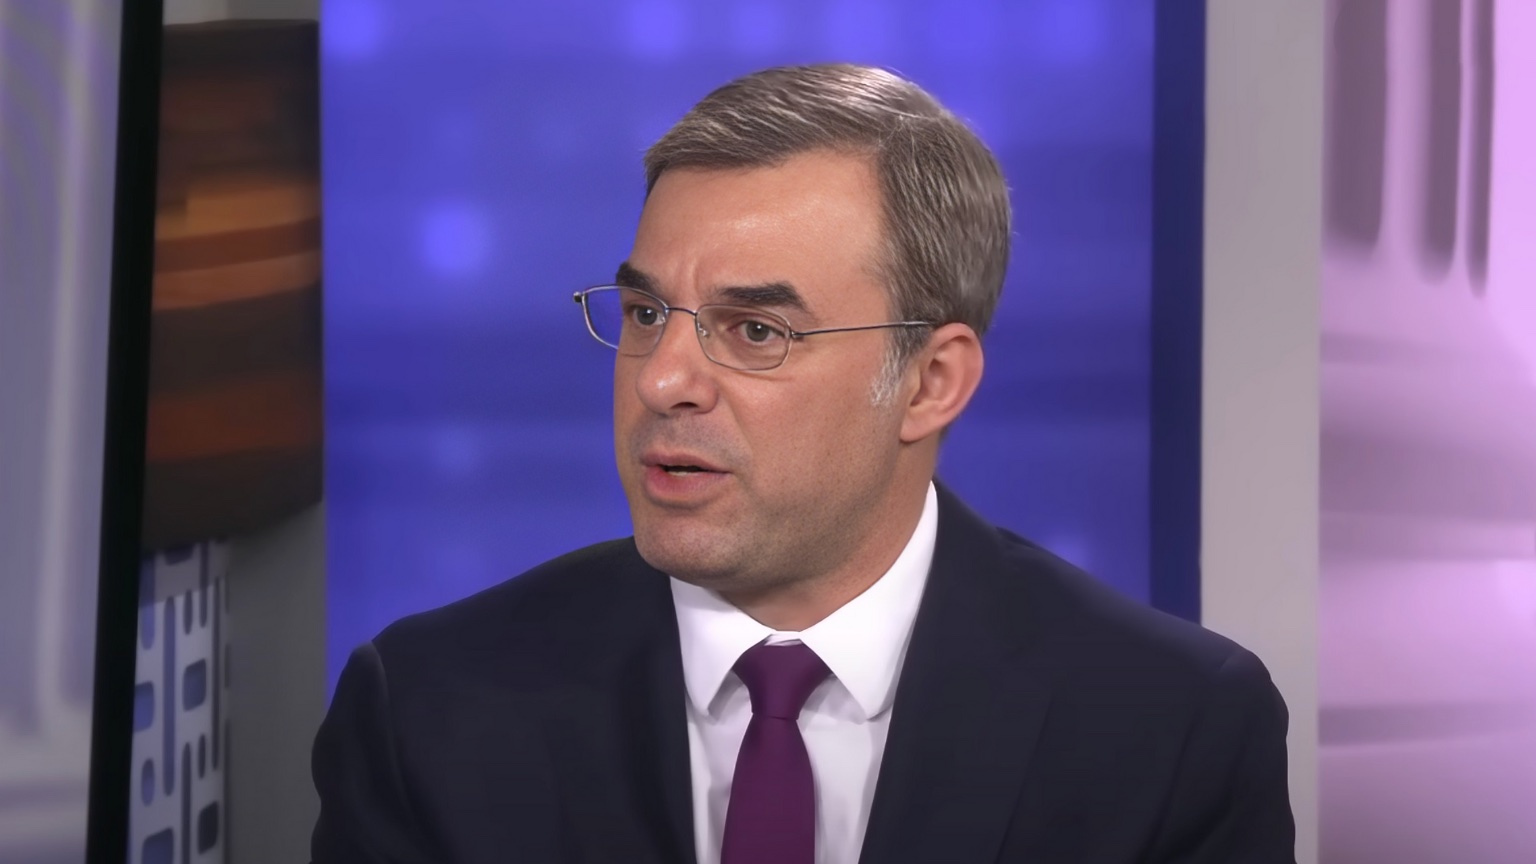 Justin Amash says former House leaders would team up to stop him from ending surveillance on Americans